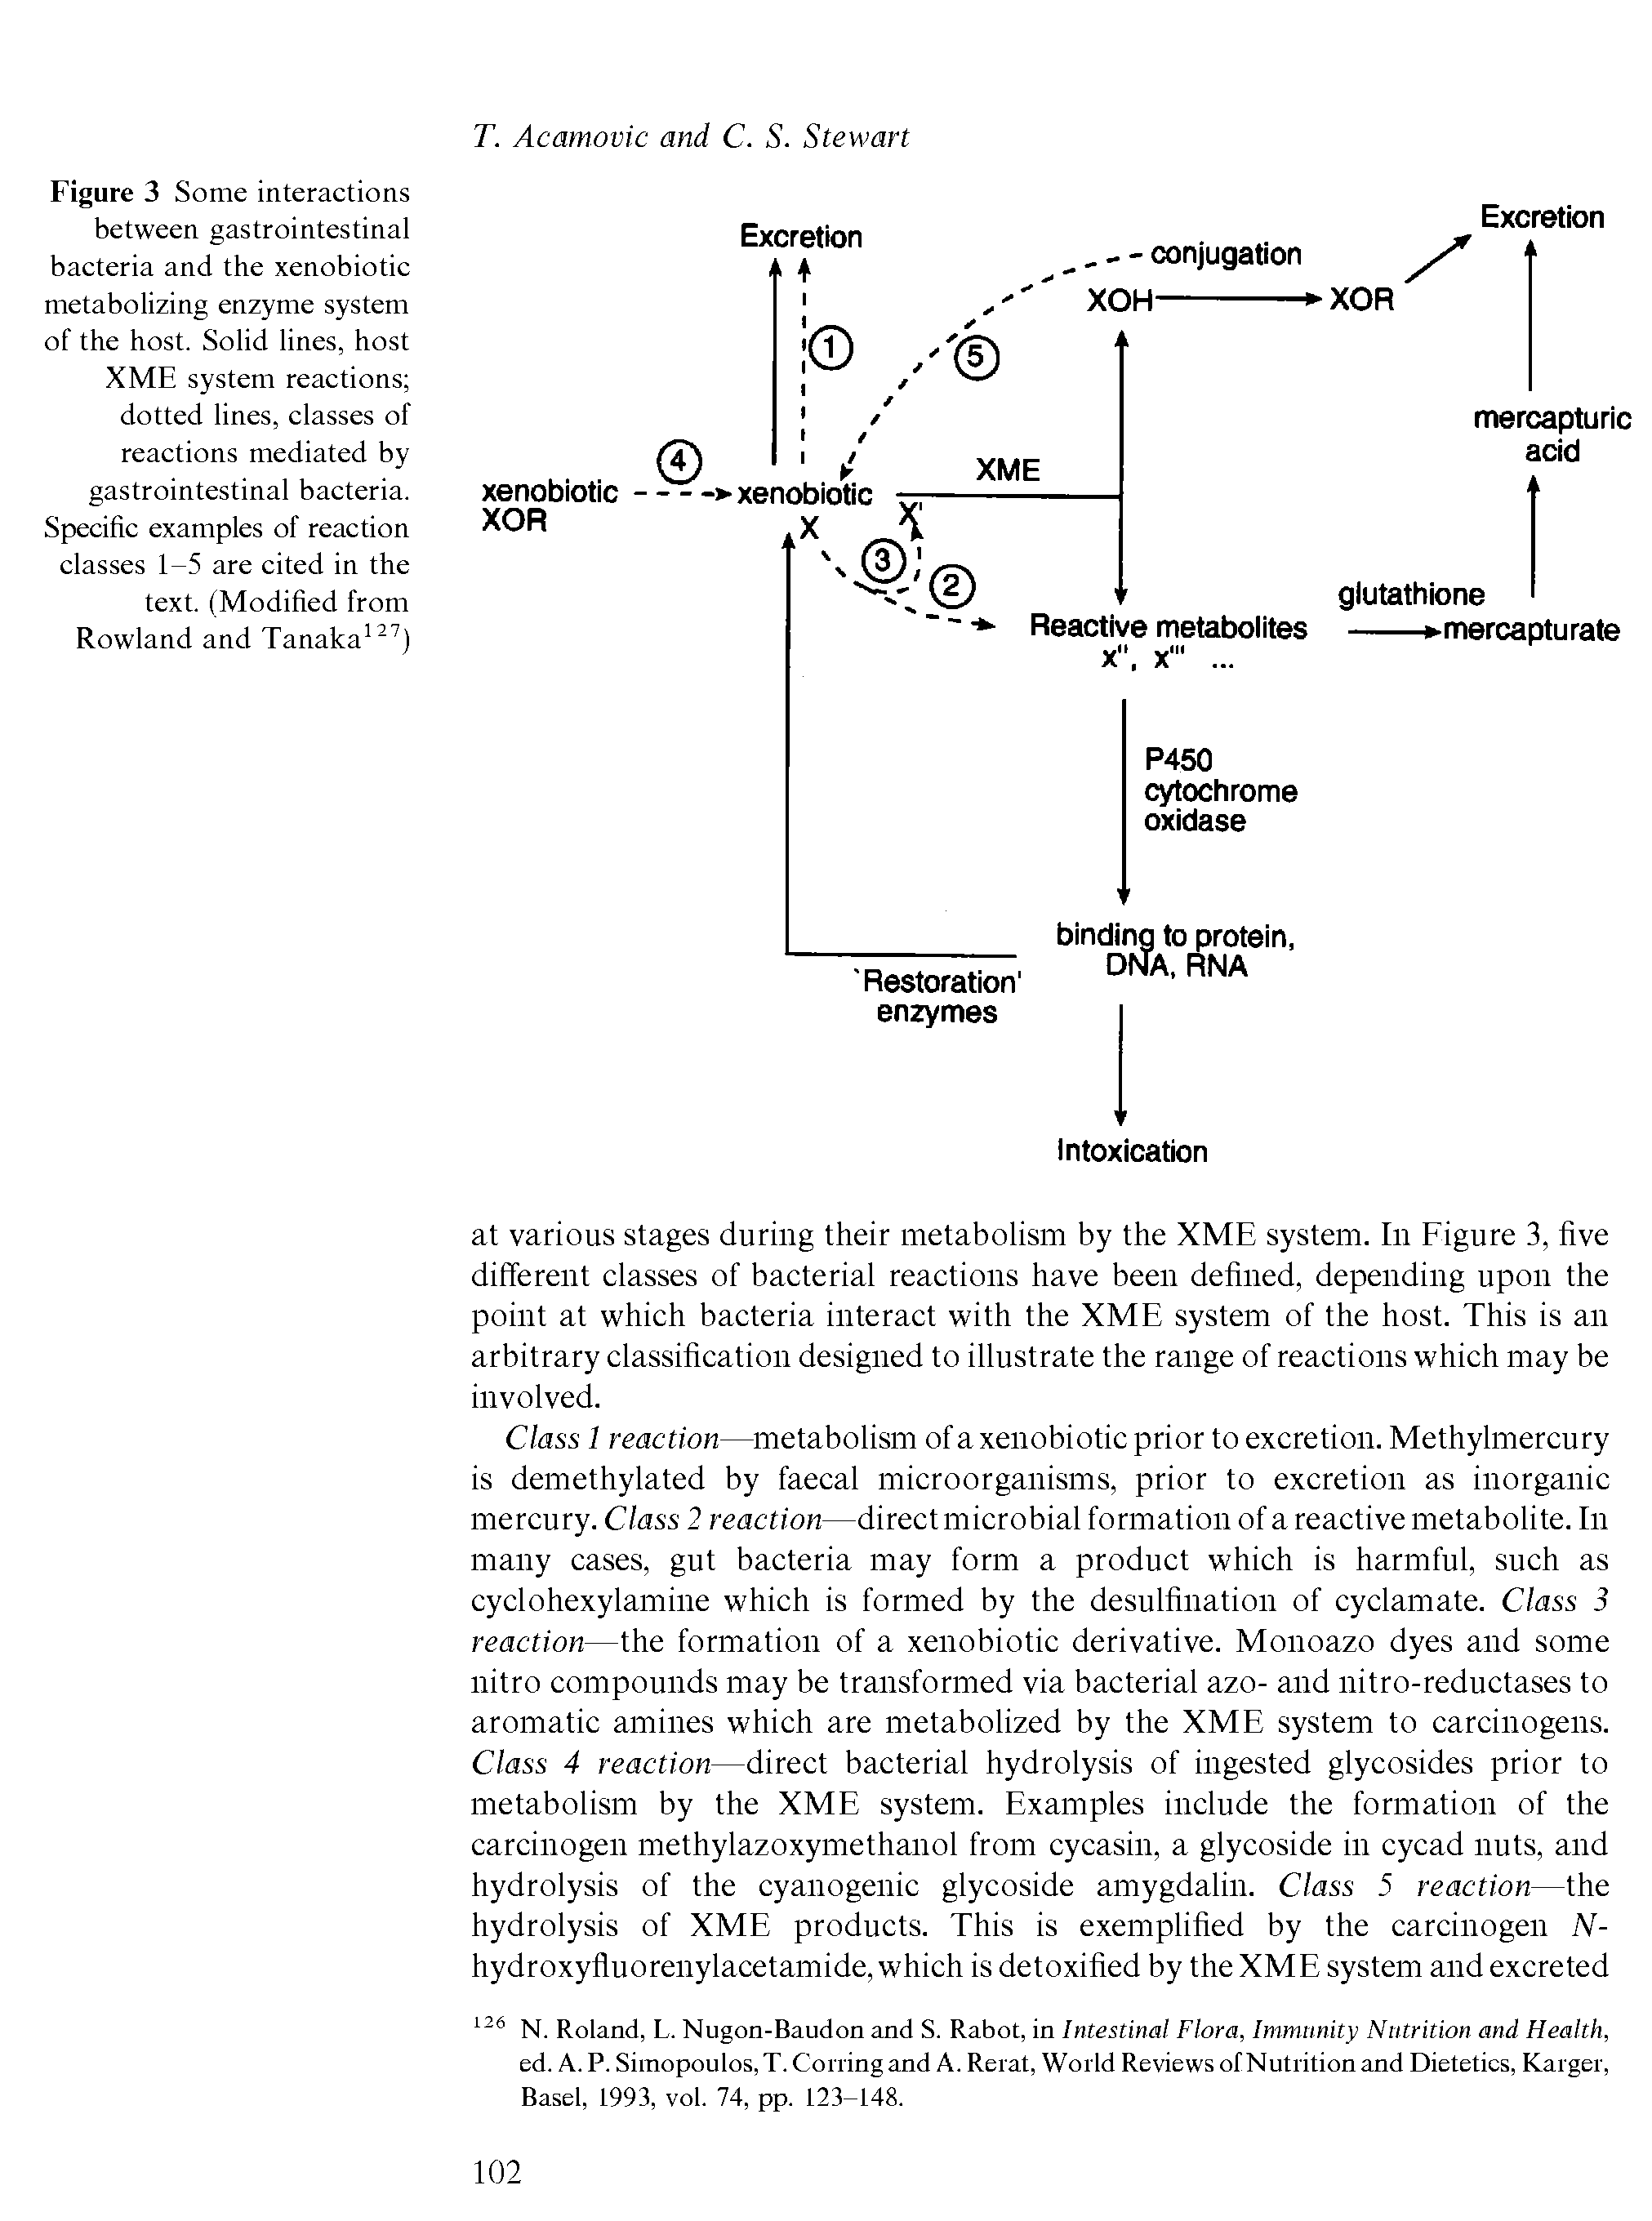 Figure 3 Some interactions between gastrointestinal bacteria and the xenobiotic metabolizing enzyme system of the host. Solid lines, host XME system reactions dotted lines, classes of reactions mediated by gastrointestinal bacteria. Specific examples of reaction classes 1-5 are cited in the text. (Modified from Rowland and Tanaka " )...